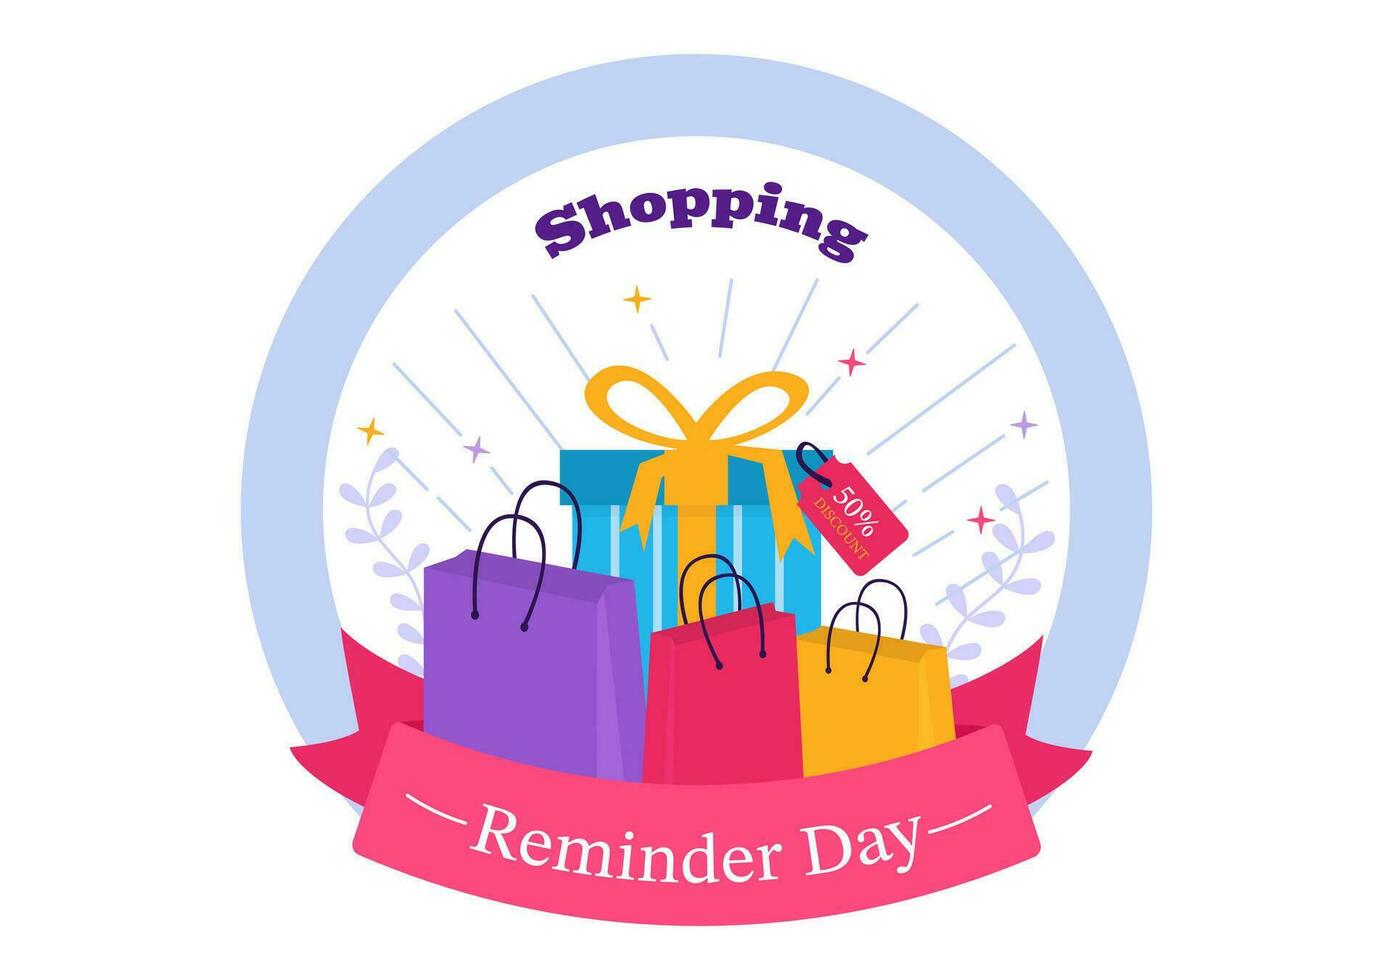 Shopping Reminder Day Vector Illustration on 26 November with Bag and Goods for Poster or Promotion in Flat Cartoon Background Design Templates